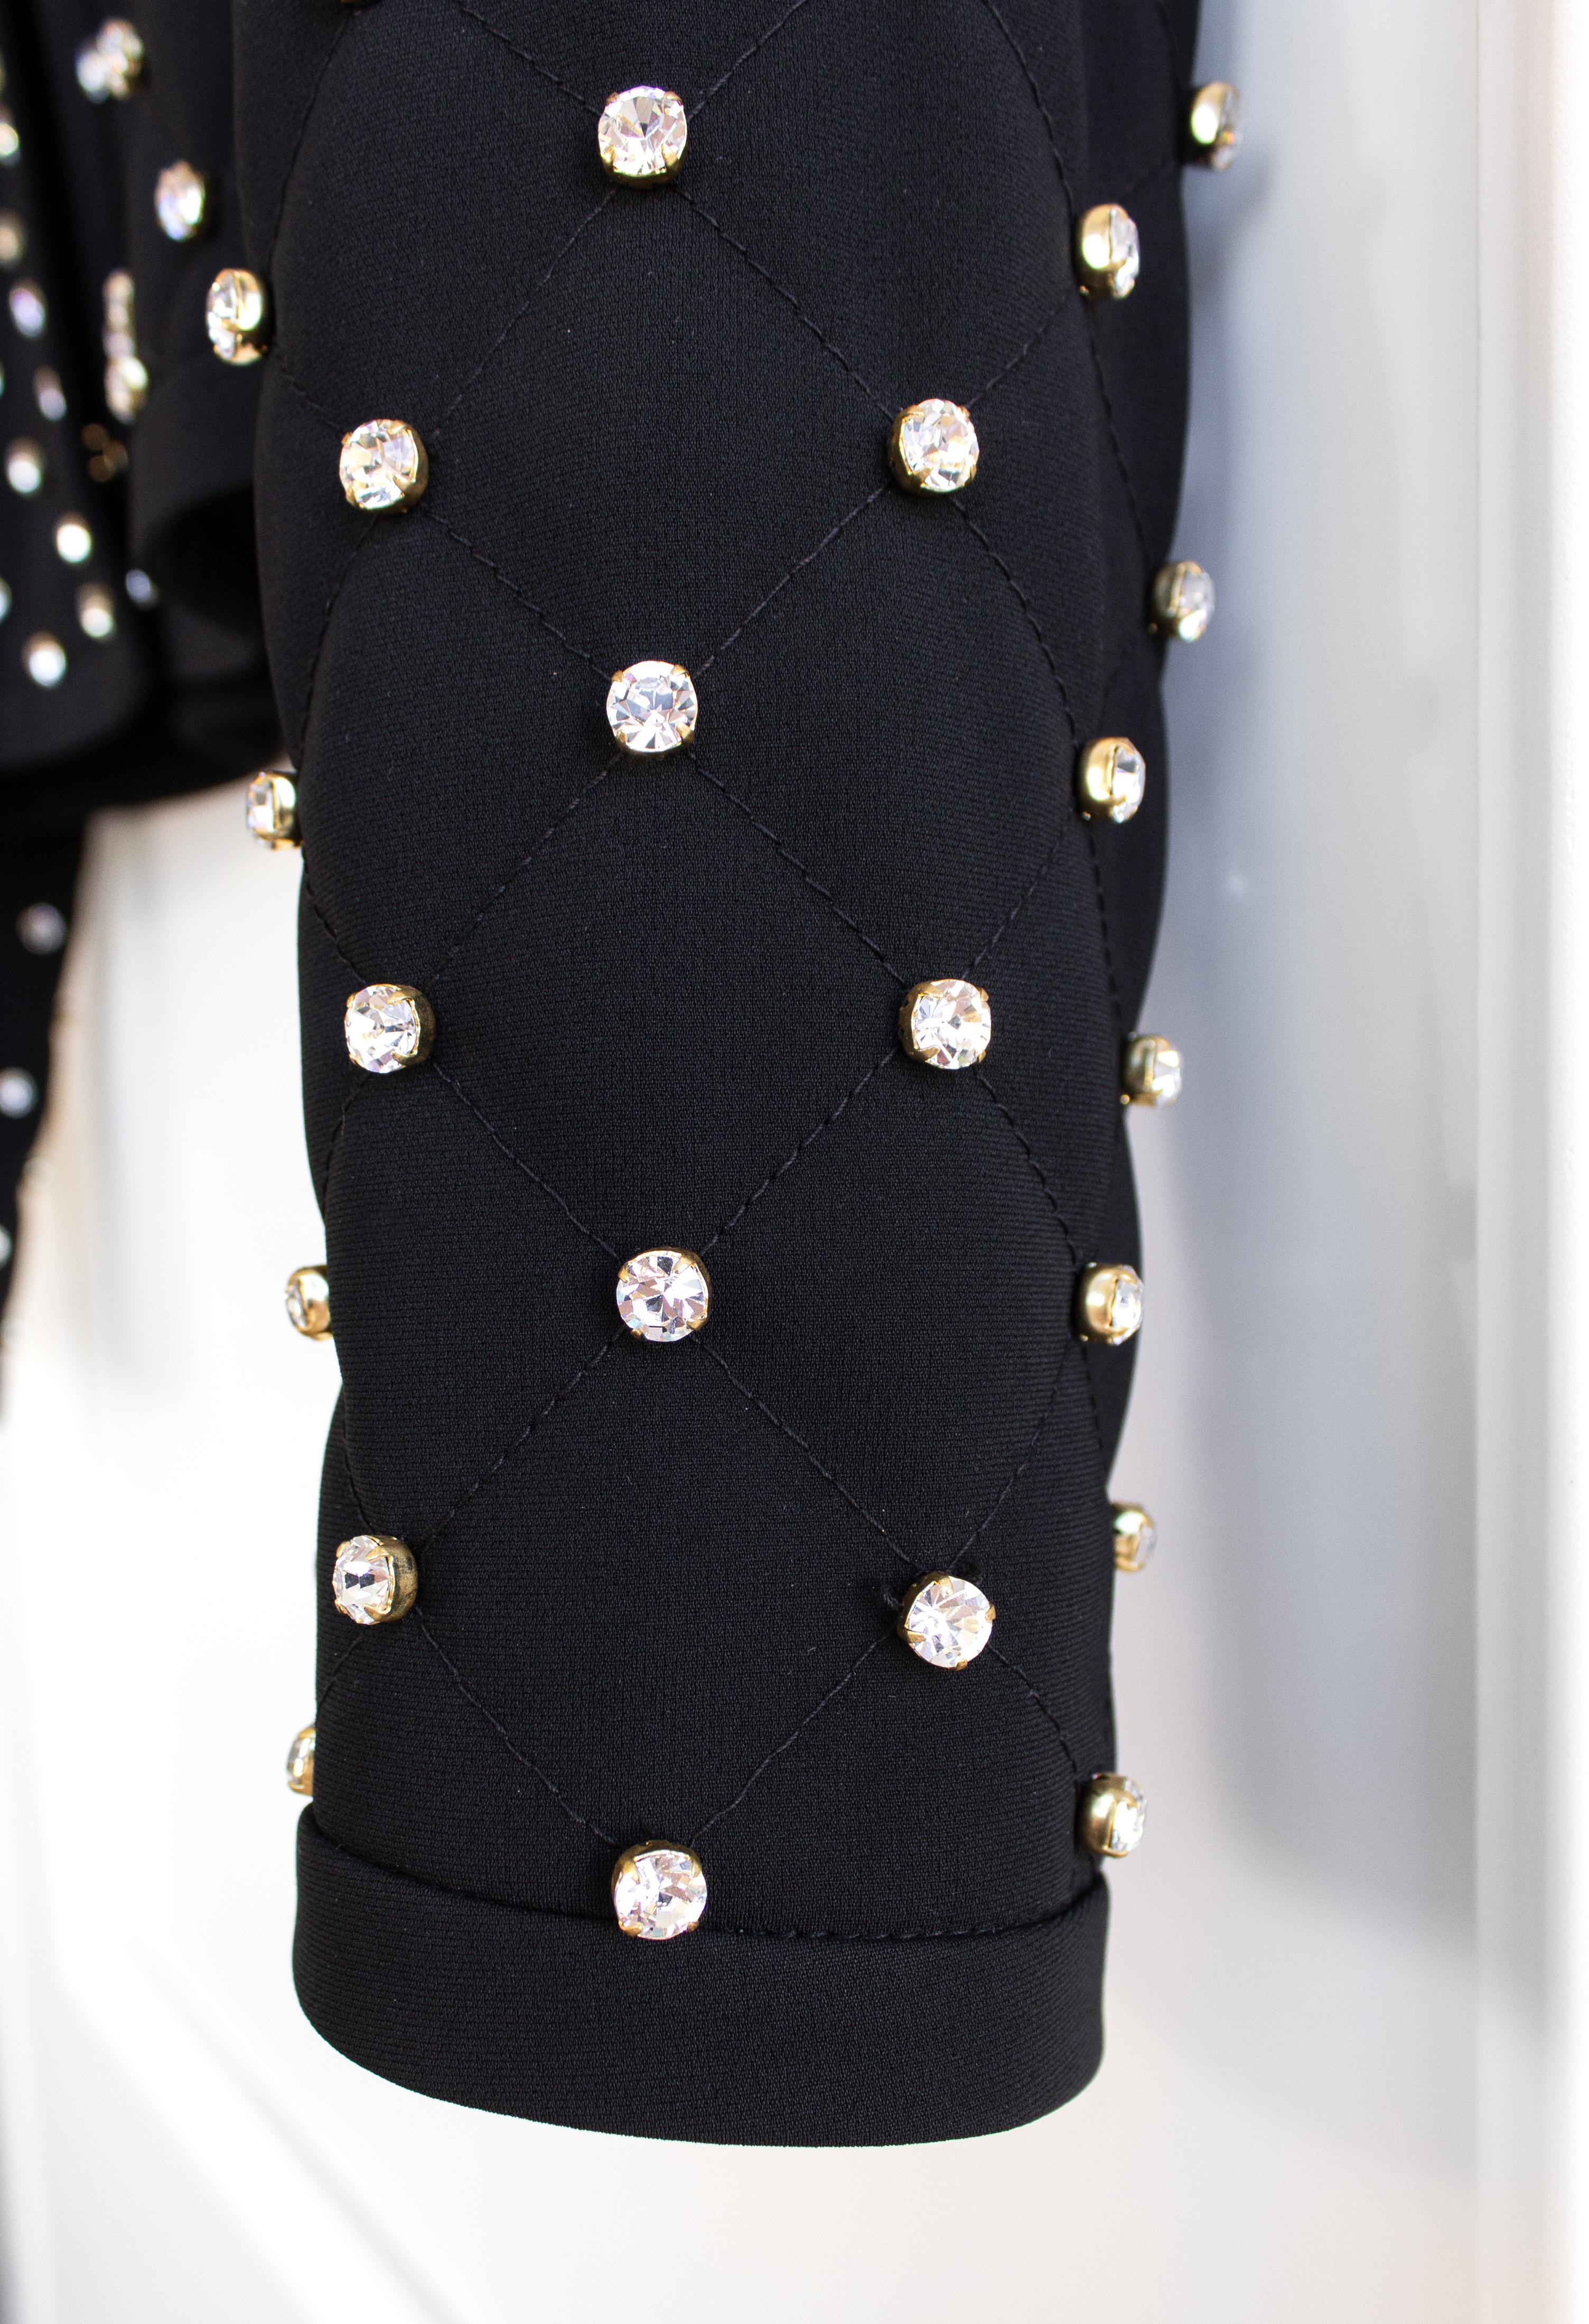 Moschino Couture S/S 2015 Barbie Crystal Embellished Rhinestone Black Jacket For Sale 8